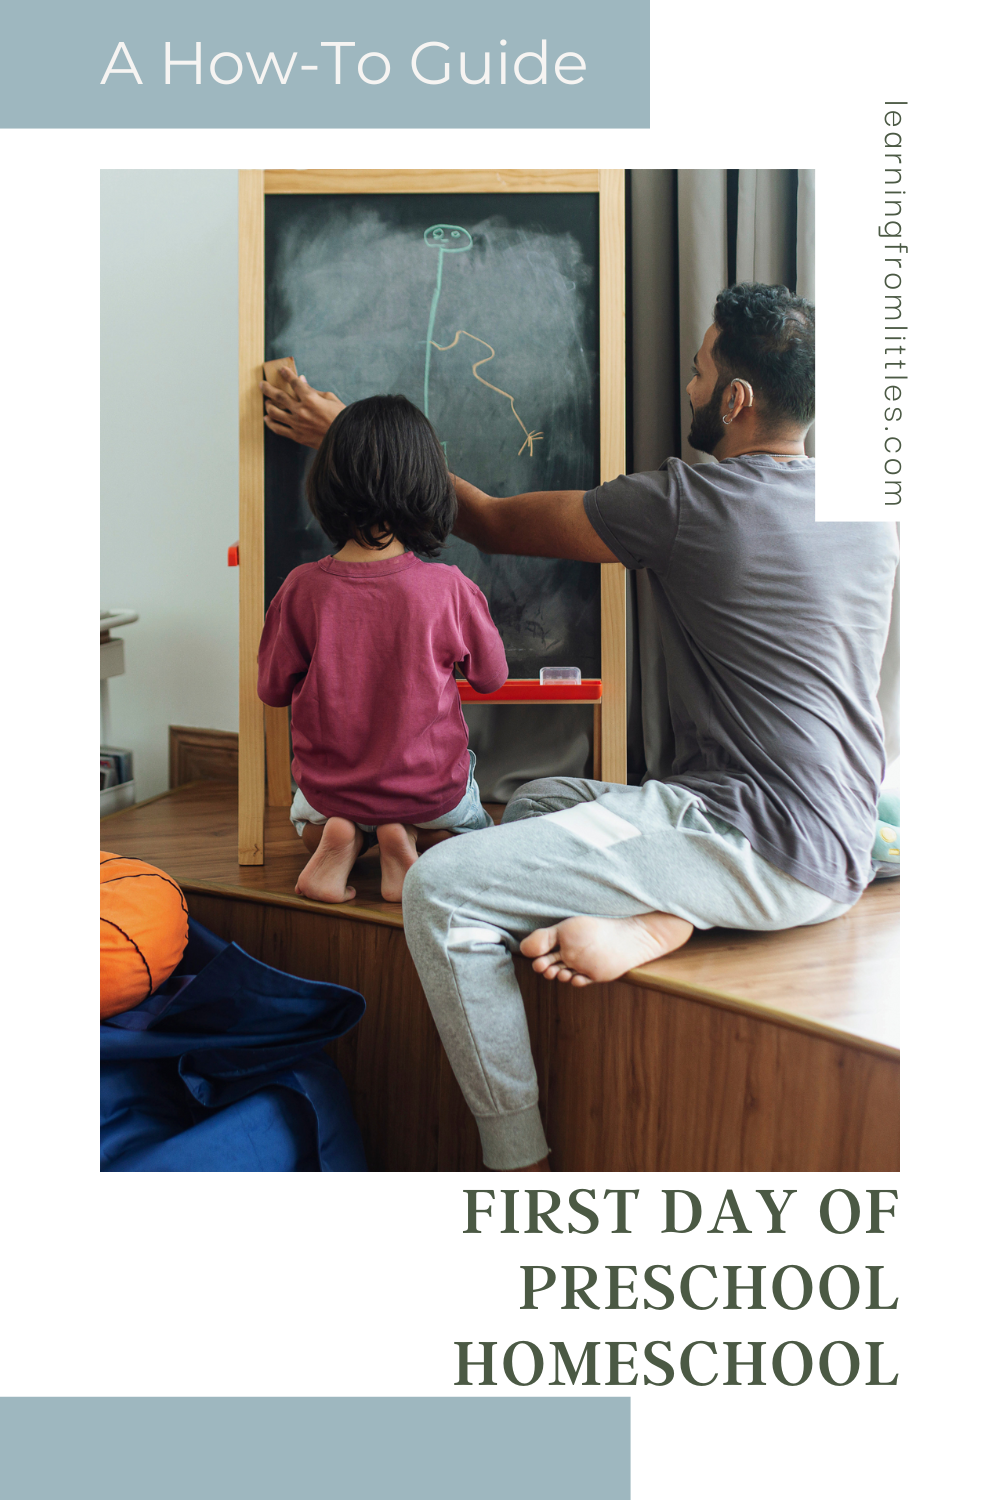 First Day of Preschool Homeschool- A How-to Guide Part 1